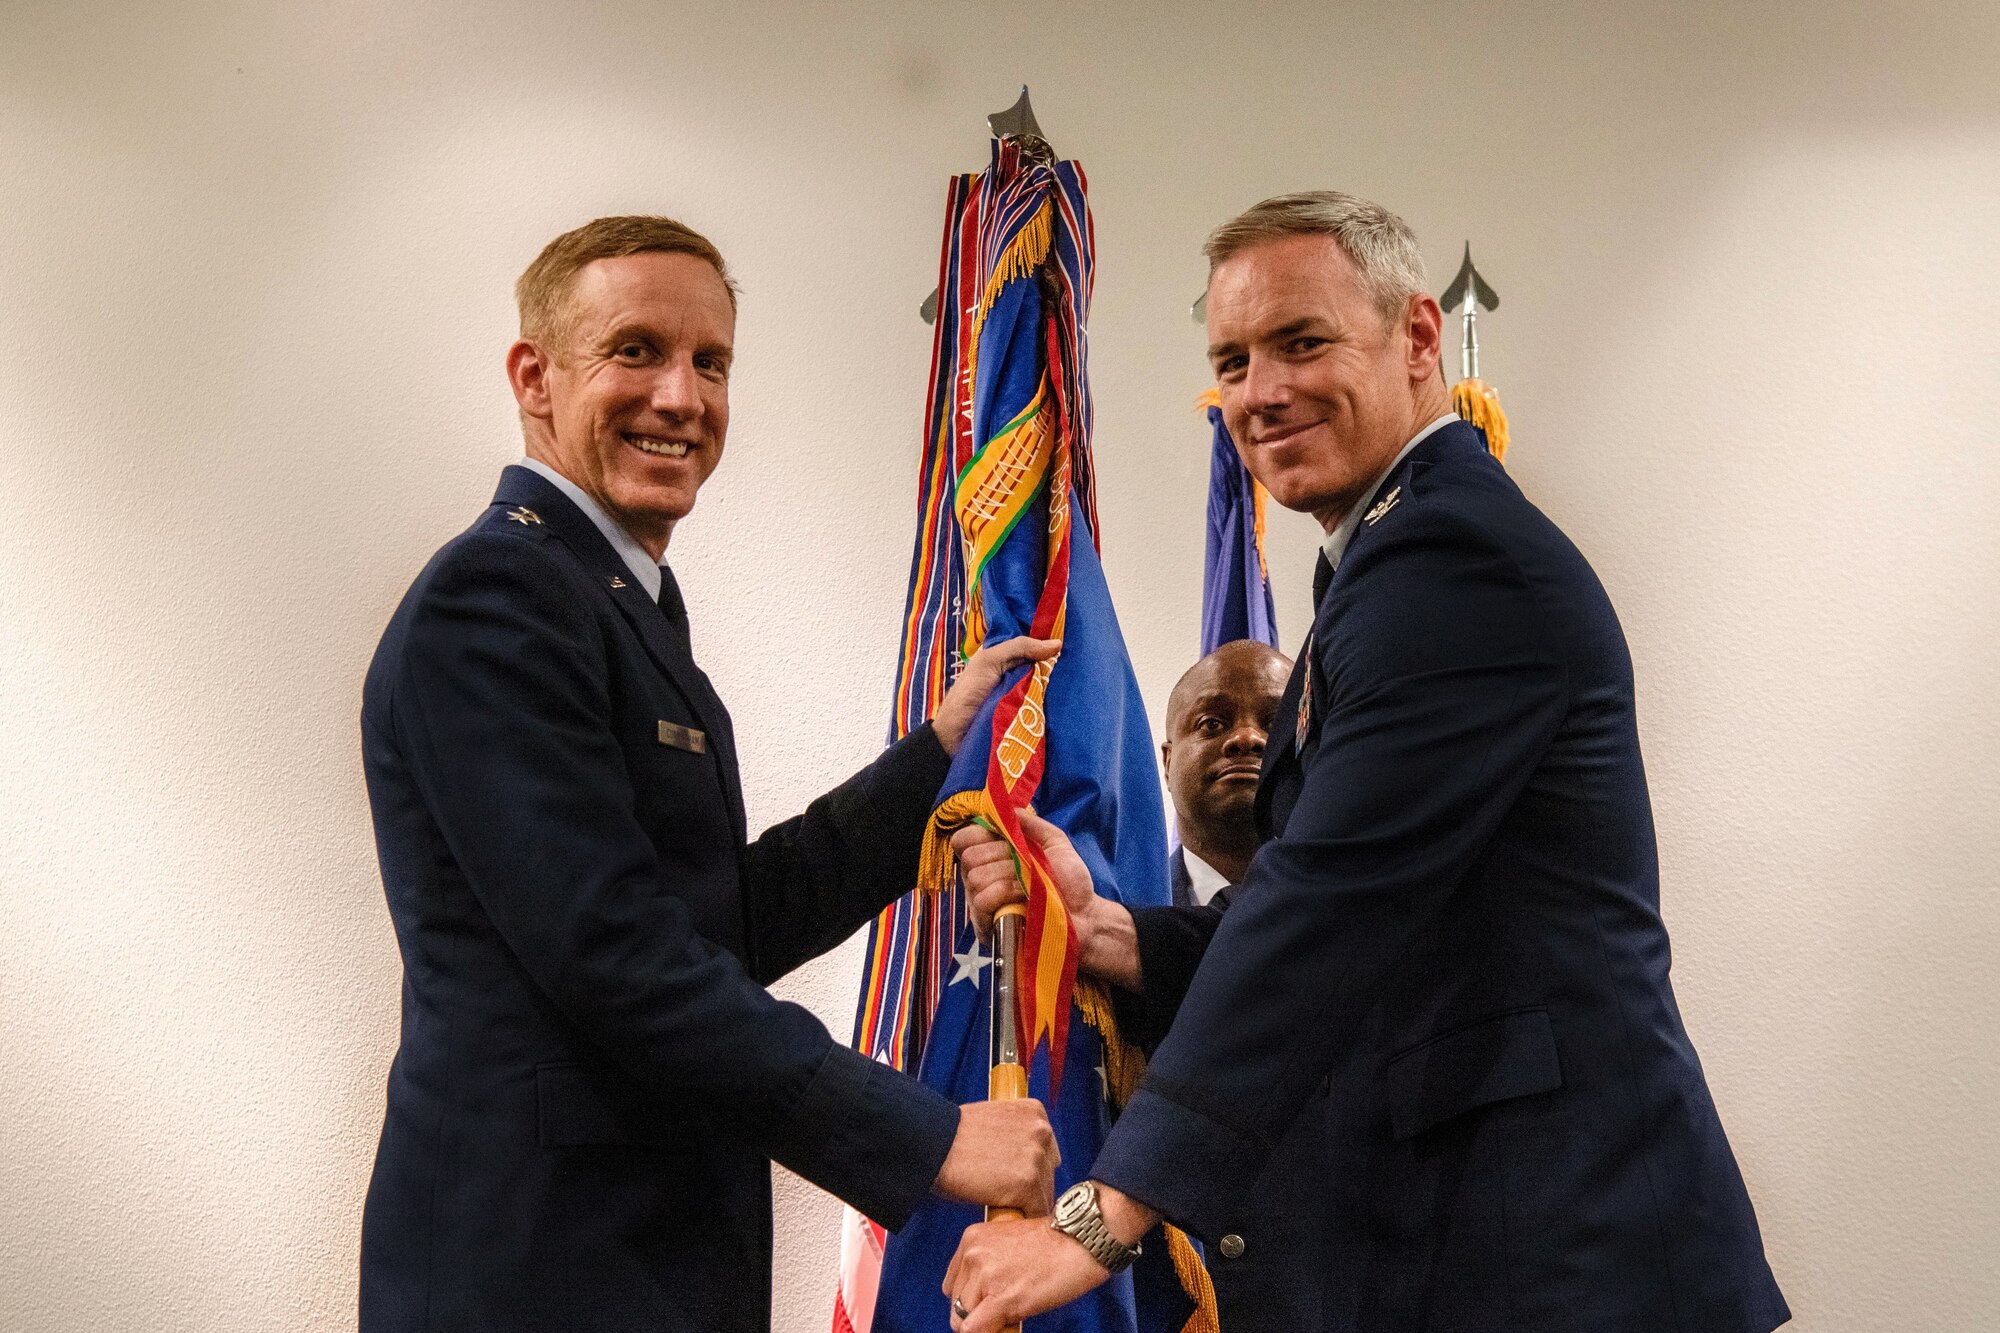 photo of Col. Fredrick Coleman III, accepting 505th Command and Control Wing guidon from Maj. Gen. Case Cunningham with Chief Master Sgt. Cornelious Thompson in the background.